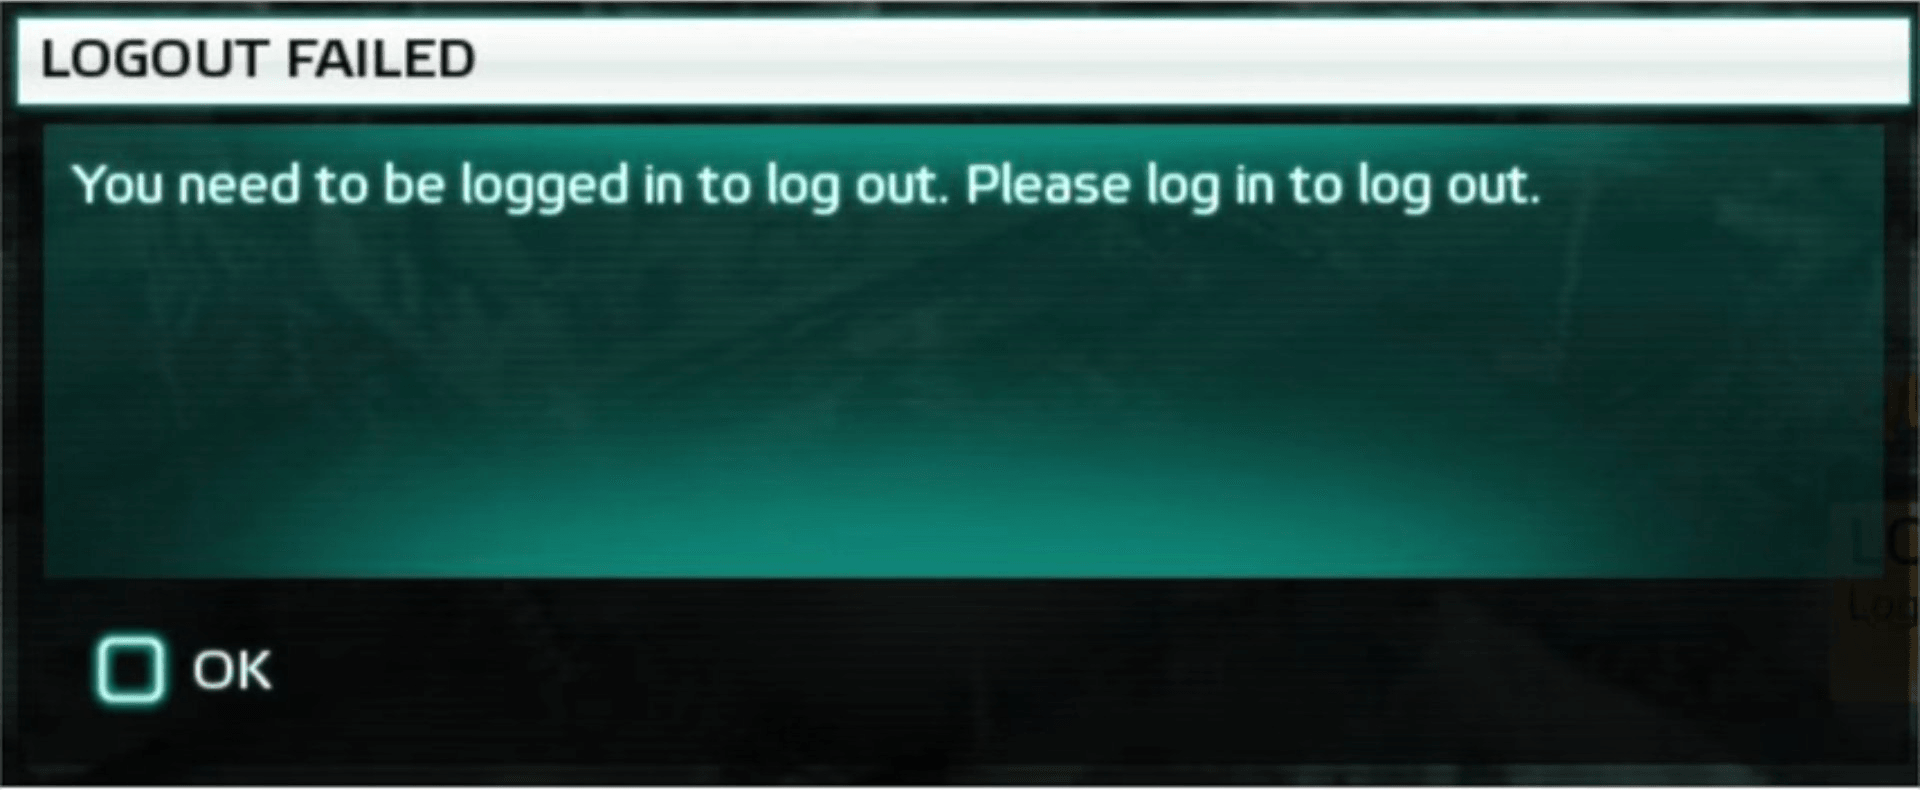 You need to be logged in to logout. Please login to logout.